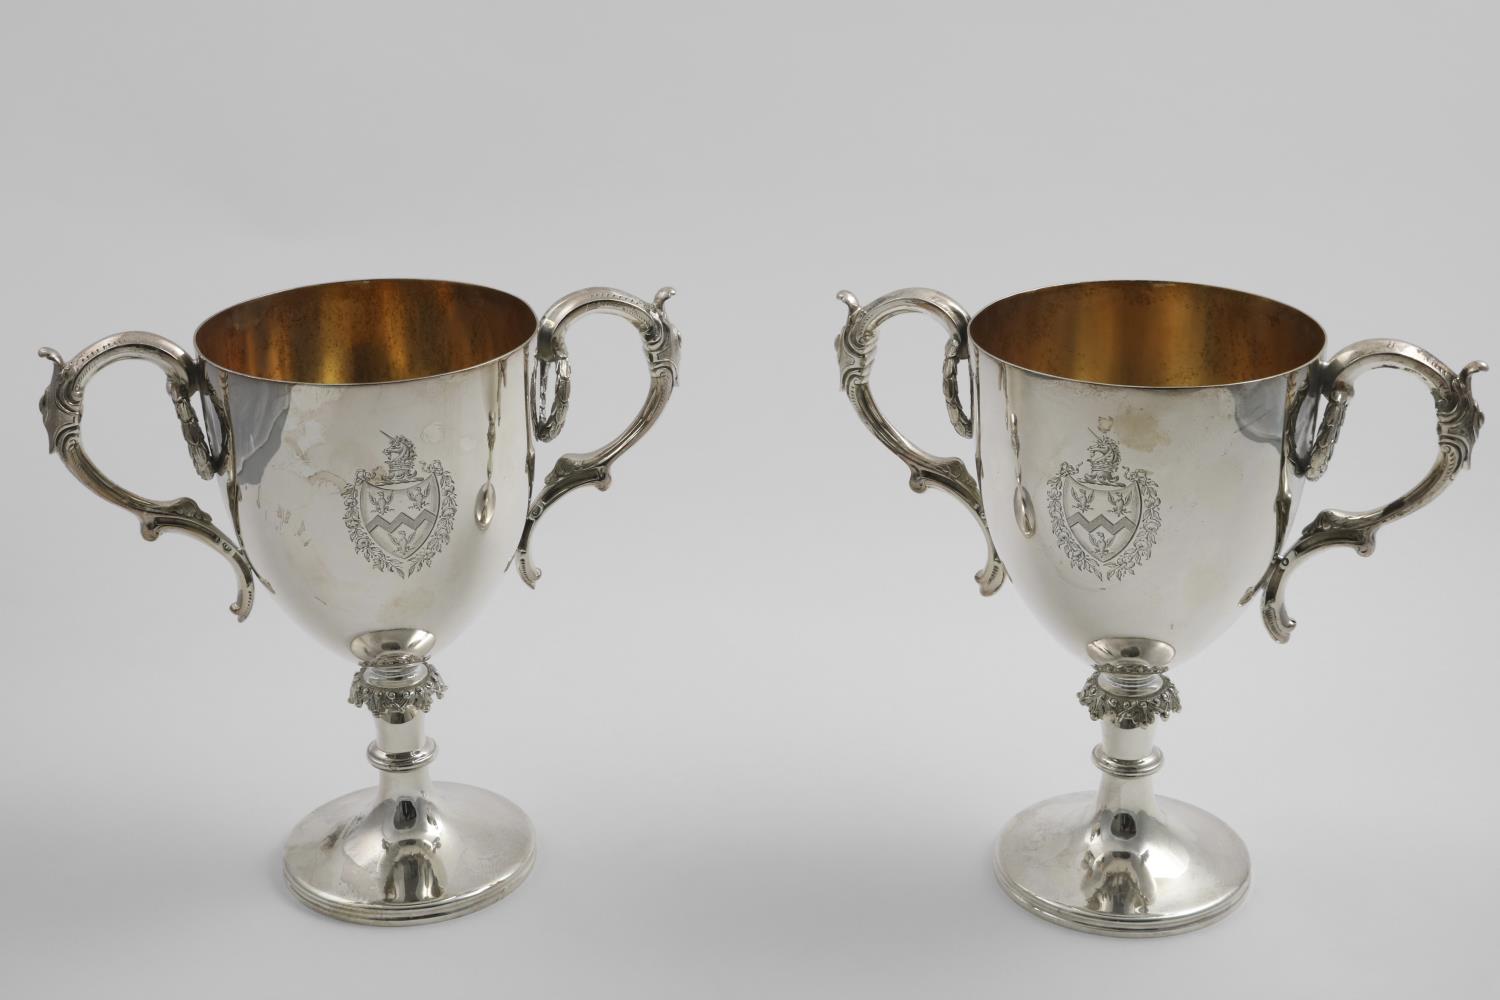 A PAIR OF VICTORIAN ELECTROPLATED TROPHY CUPS with gilt interiors and an engraved coat of arms on